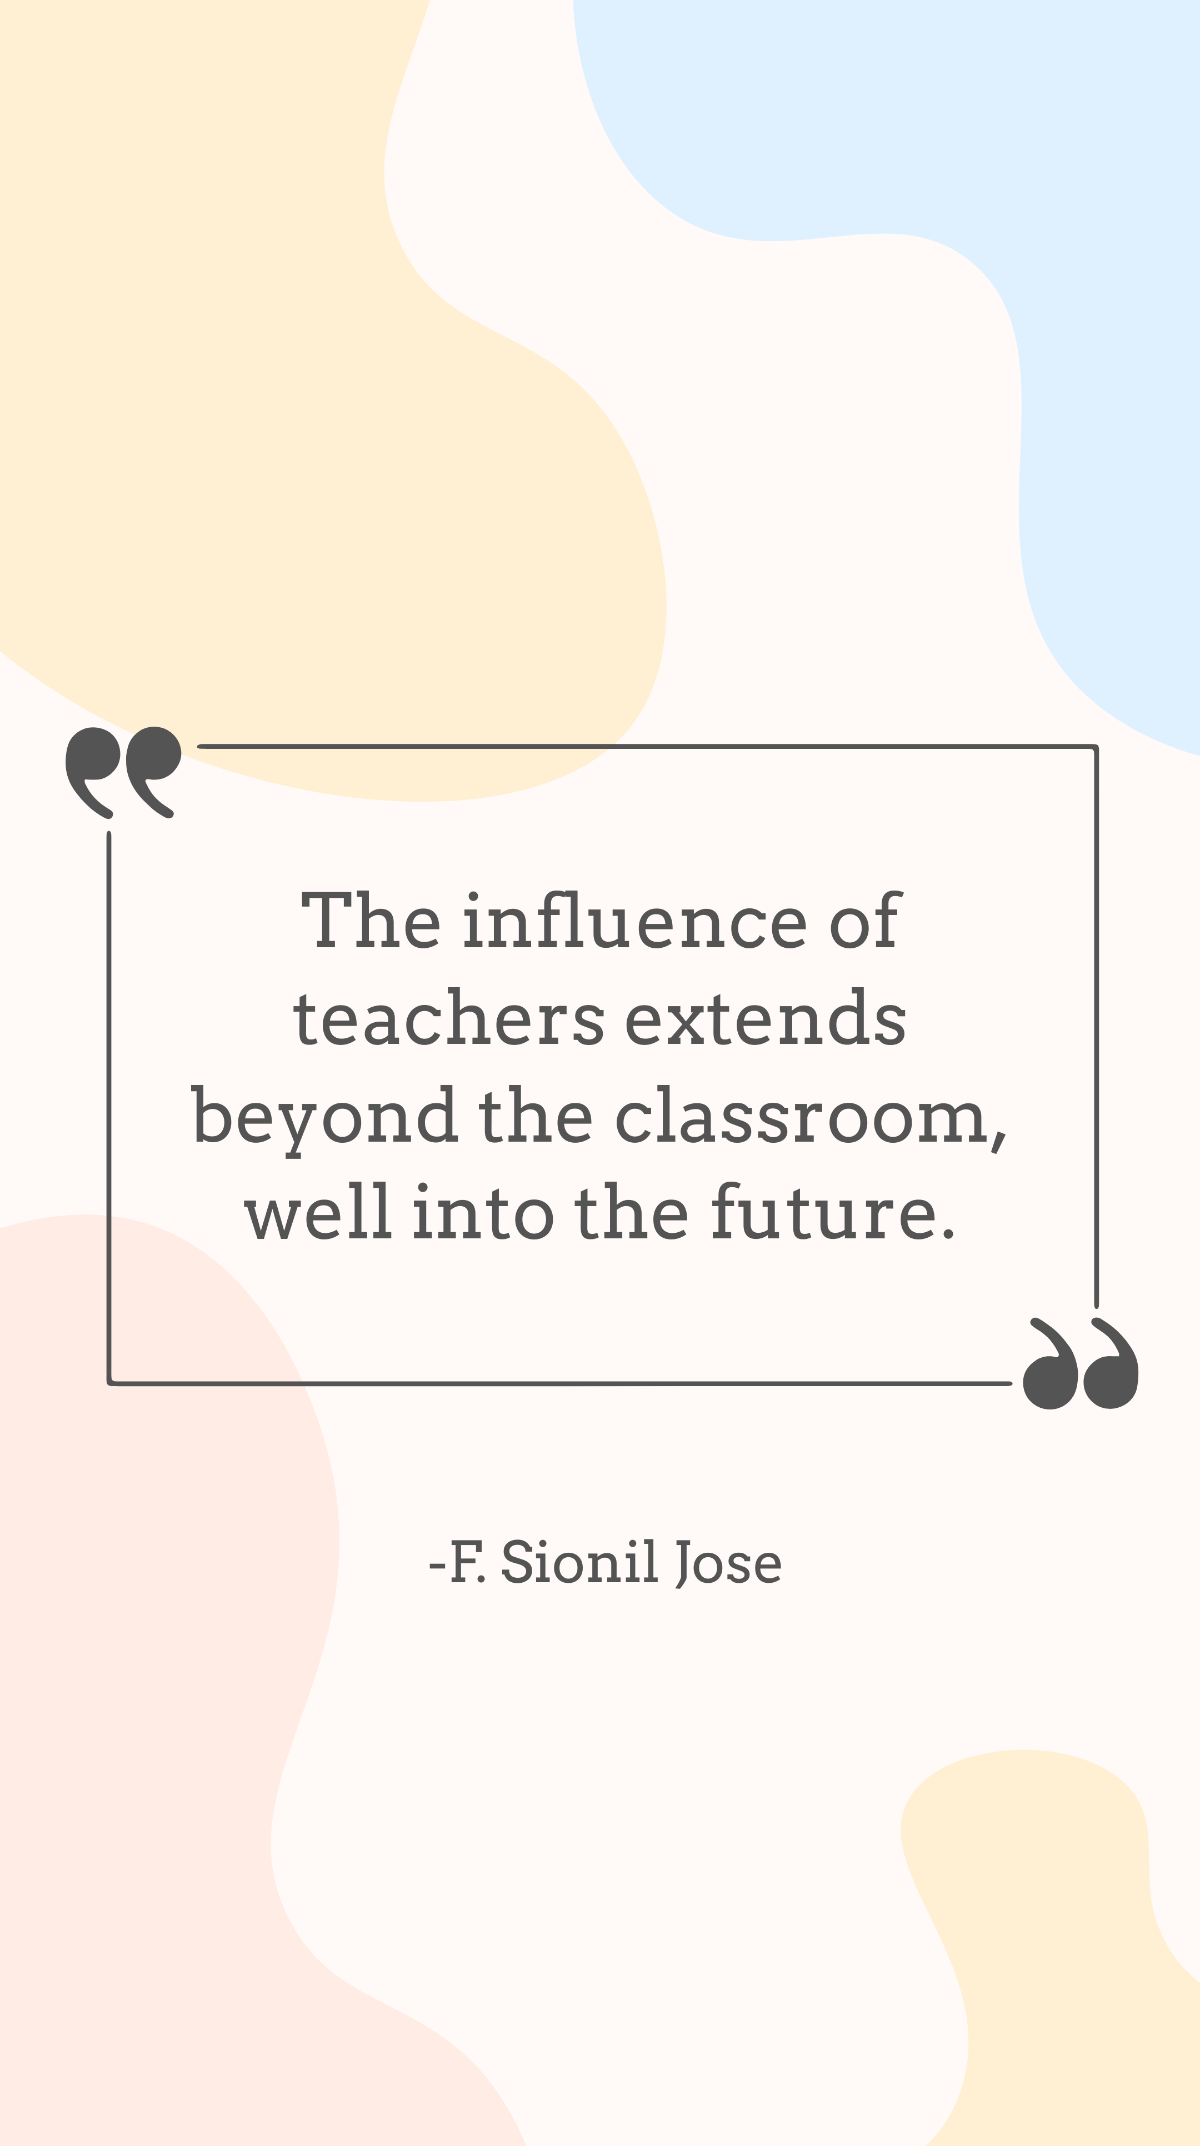 F. Sionil Jose - The influence of teachers extends beyond the classroom, well into the future. Template